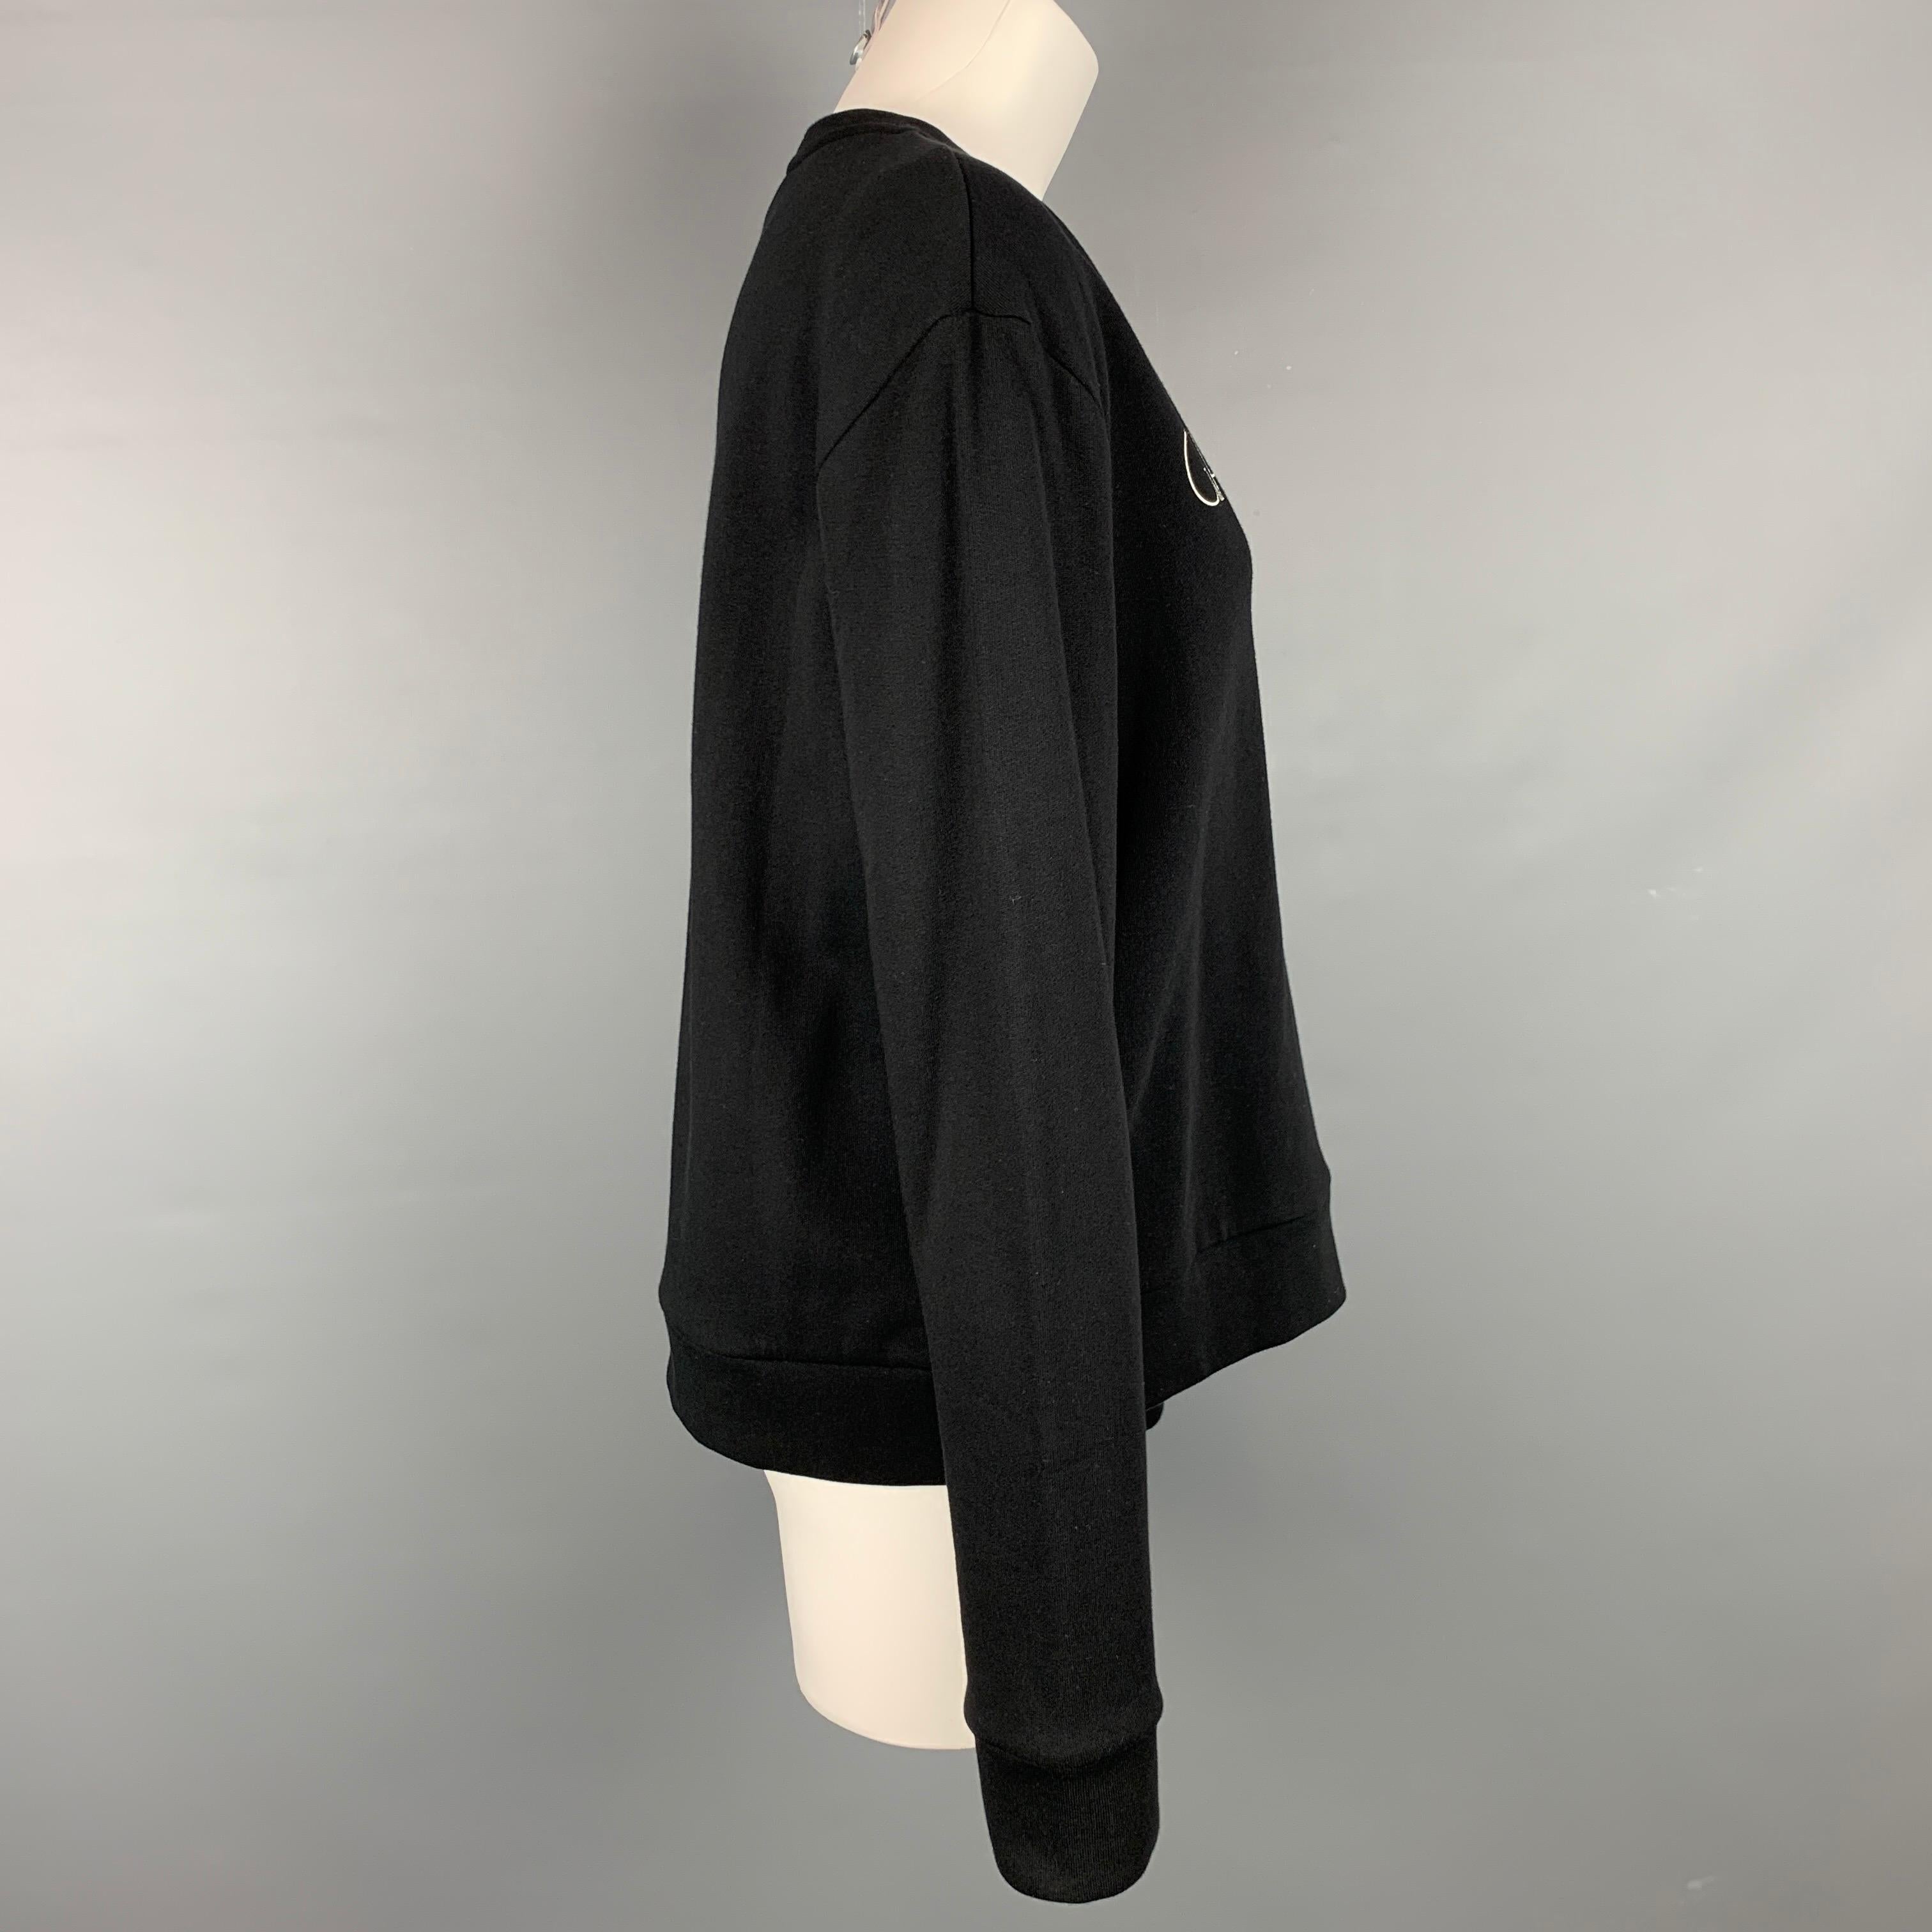 GIAMBATTISTA VALLI pullover comes in a black cotton with a white logo print detail featuring a crew-neck.

New With Tags. 
Marked: 46/XL
Original Retail Price: $643.00

Measurements:

Shoulder: 20 in.
Bust: 48 in.
Sleeve: 26 in.
Length: 24 in. 